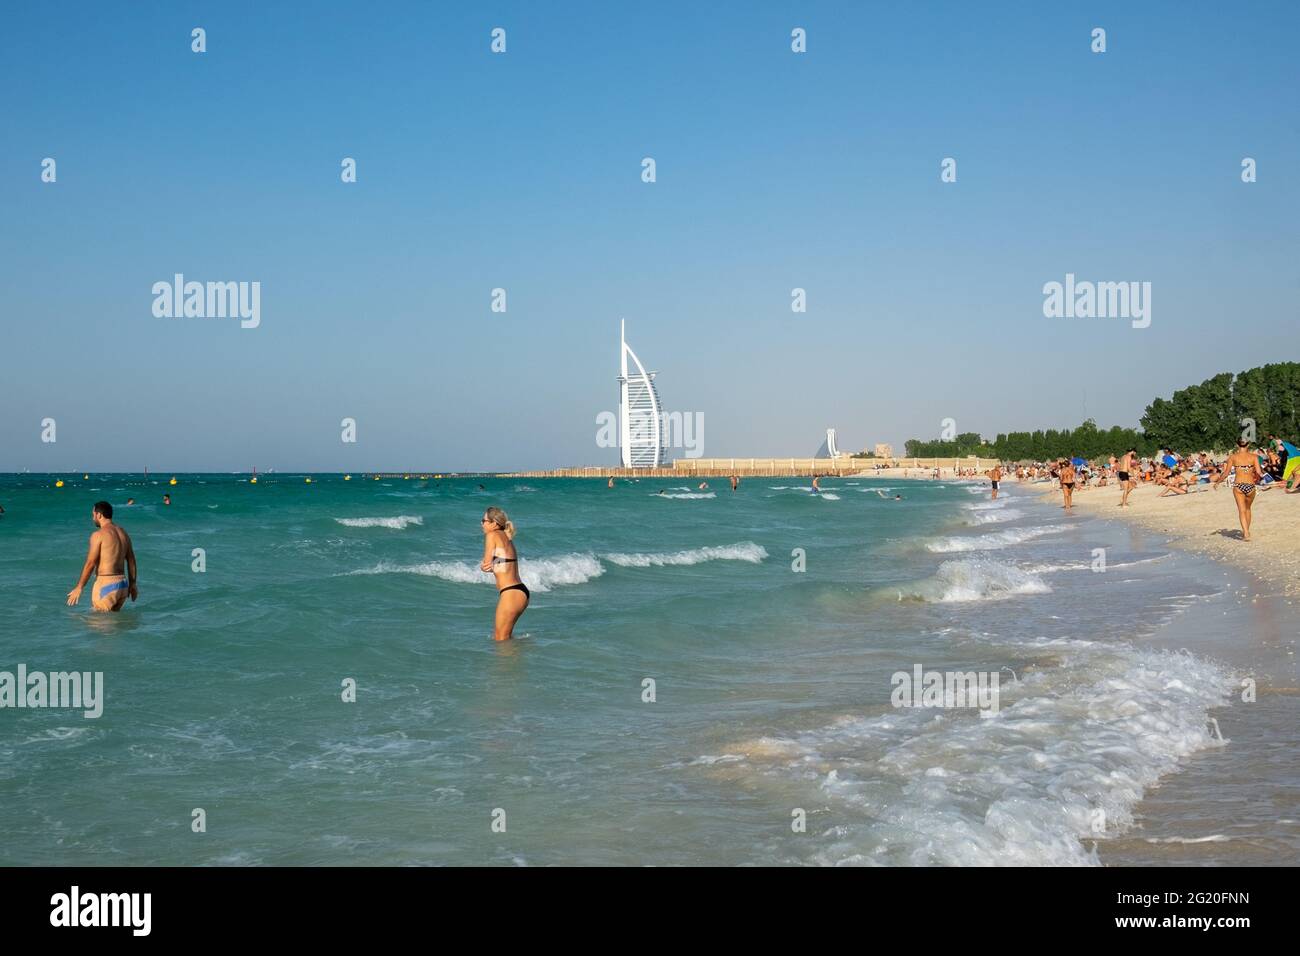 People swimming in the sea with the white sail of Burj Al Arab visible in the distance. Dubai, Stock Photo